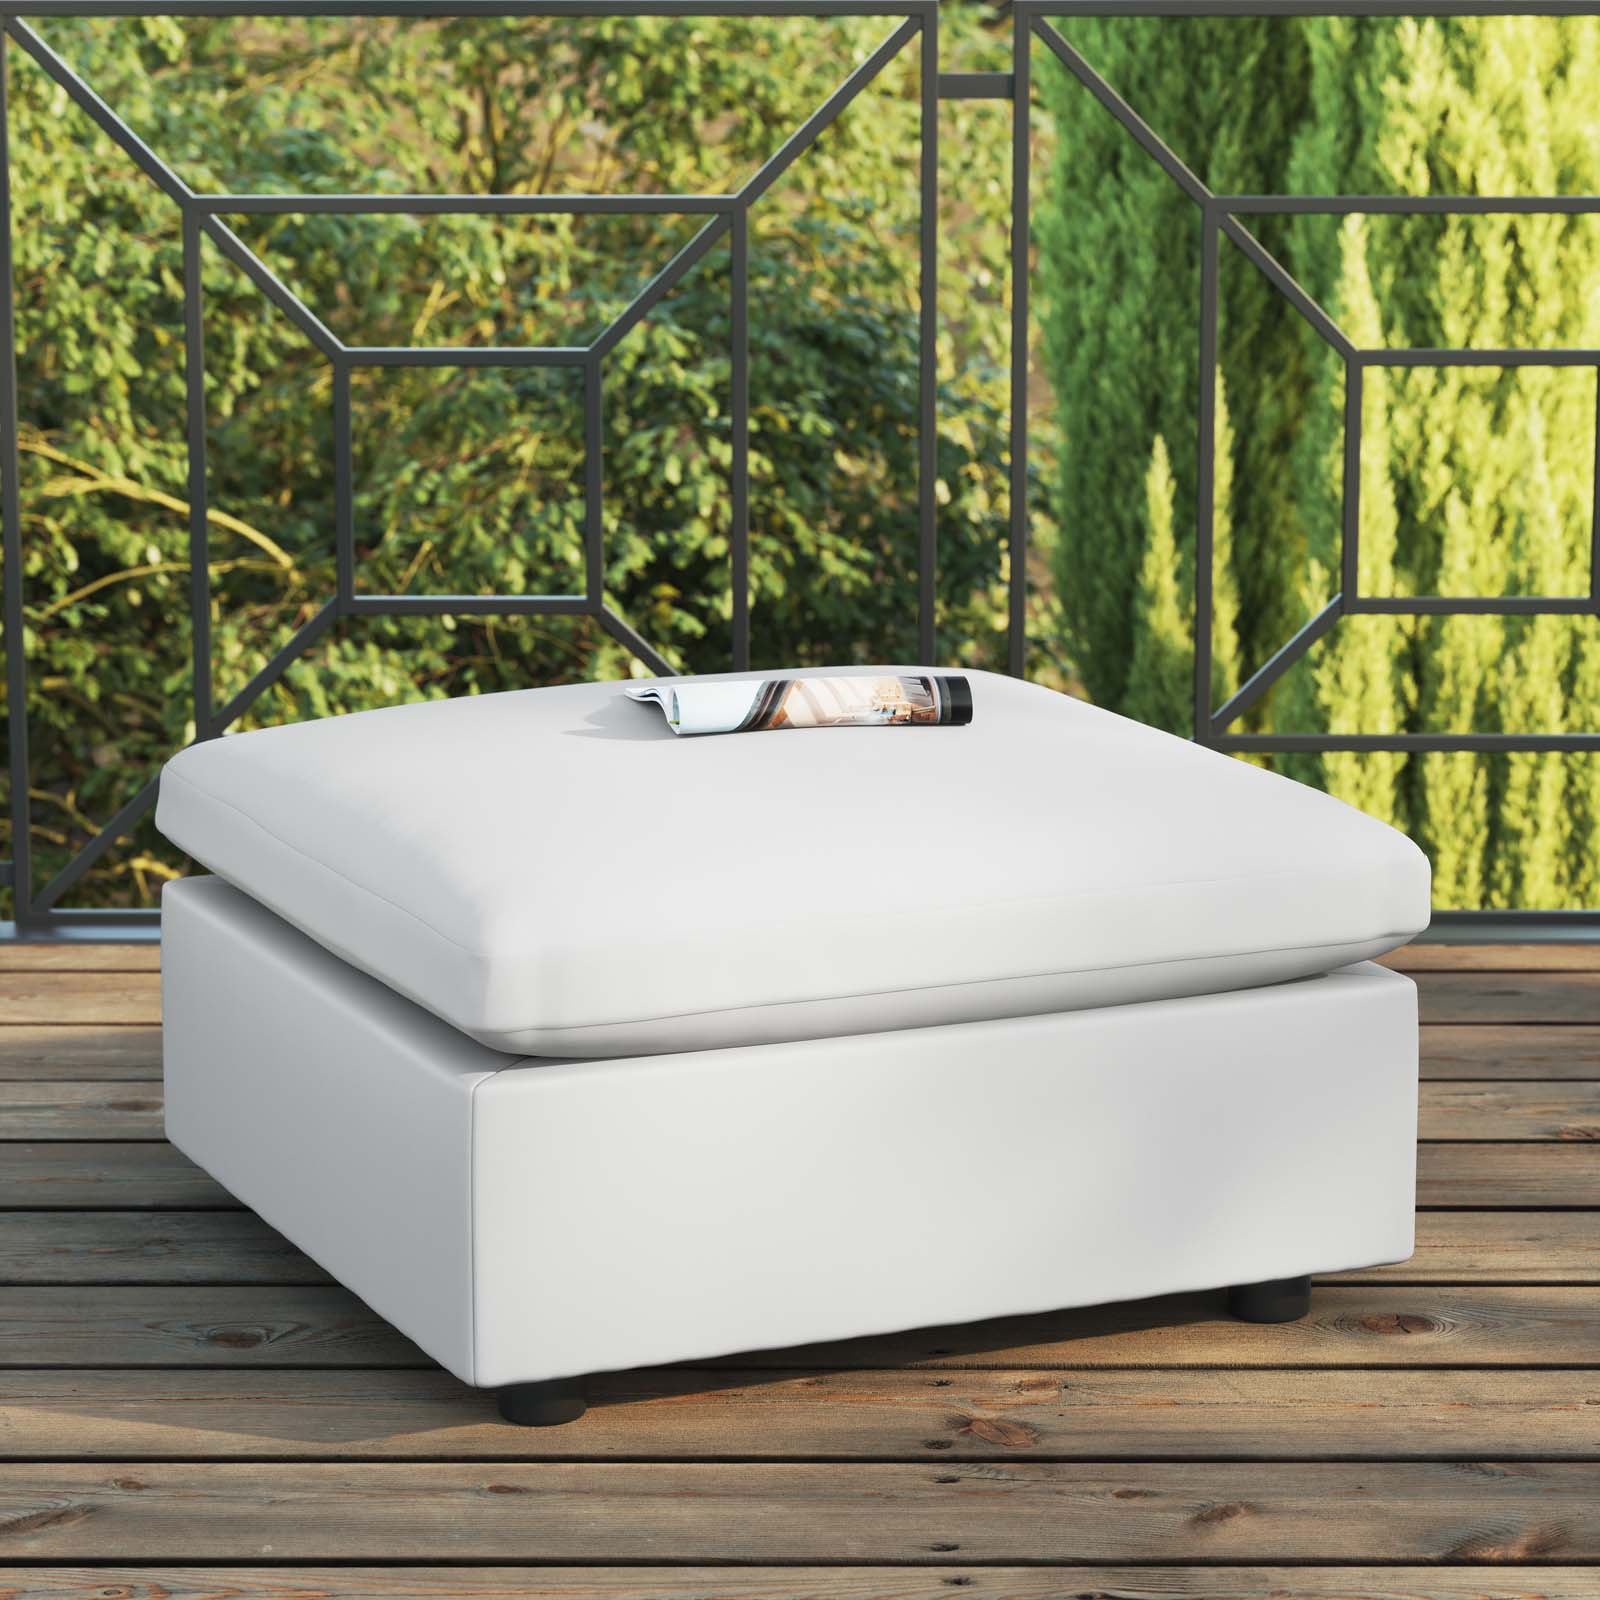 Commix Overstuffed Outdoor Patio Ottoman-Outdoor Ottoman-Modway-Wall2Wall Furnishings